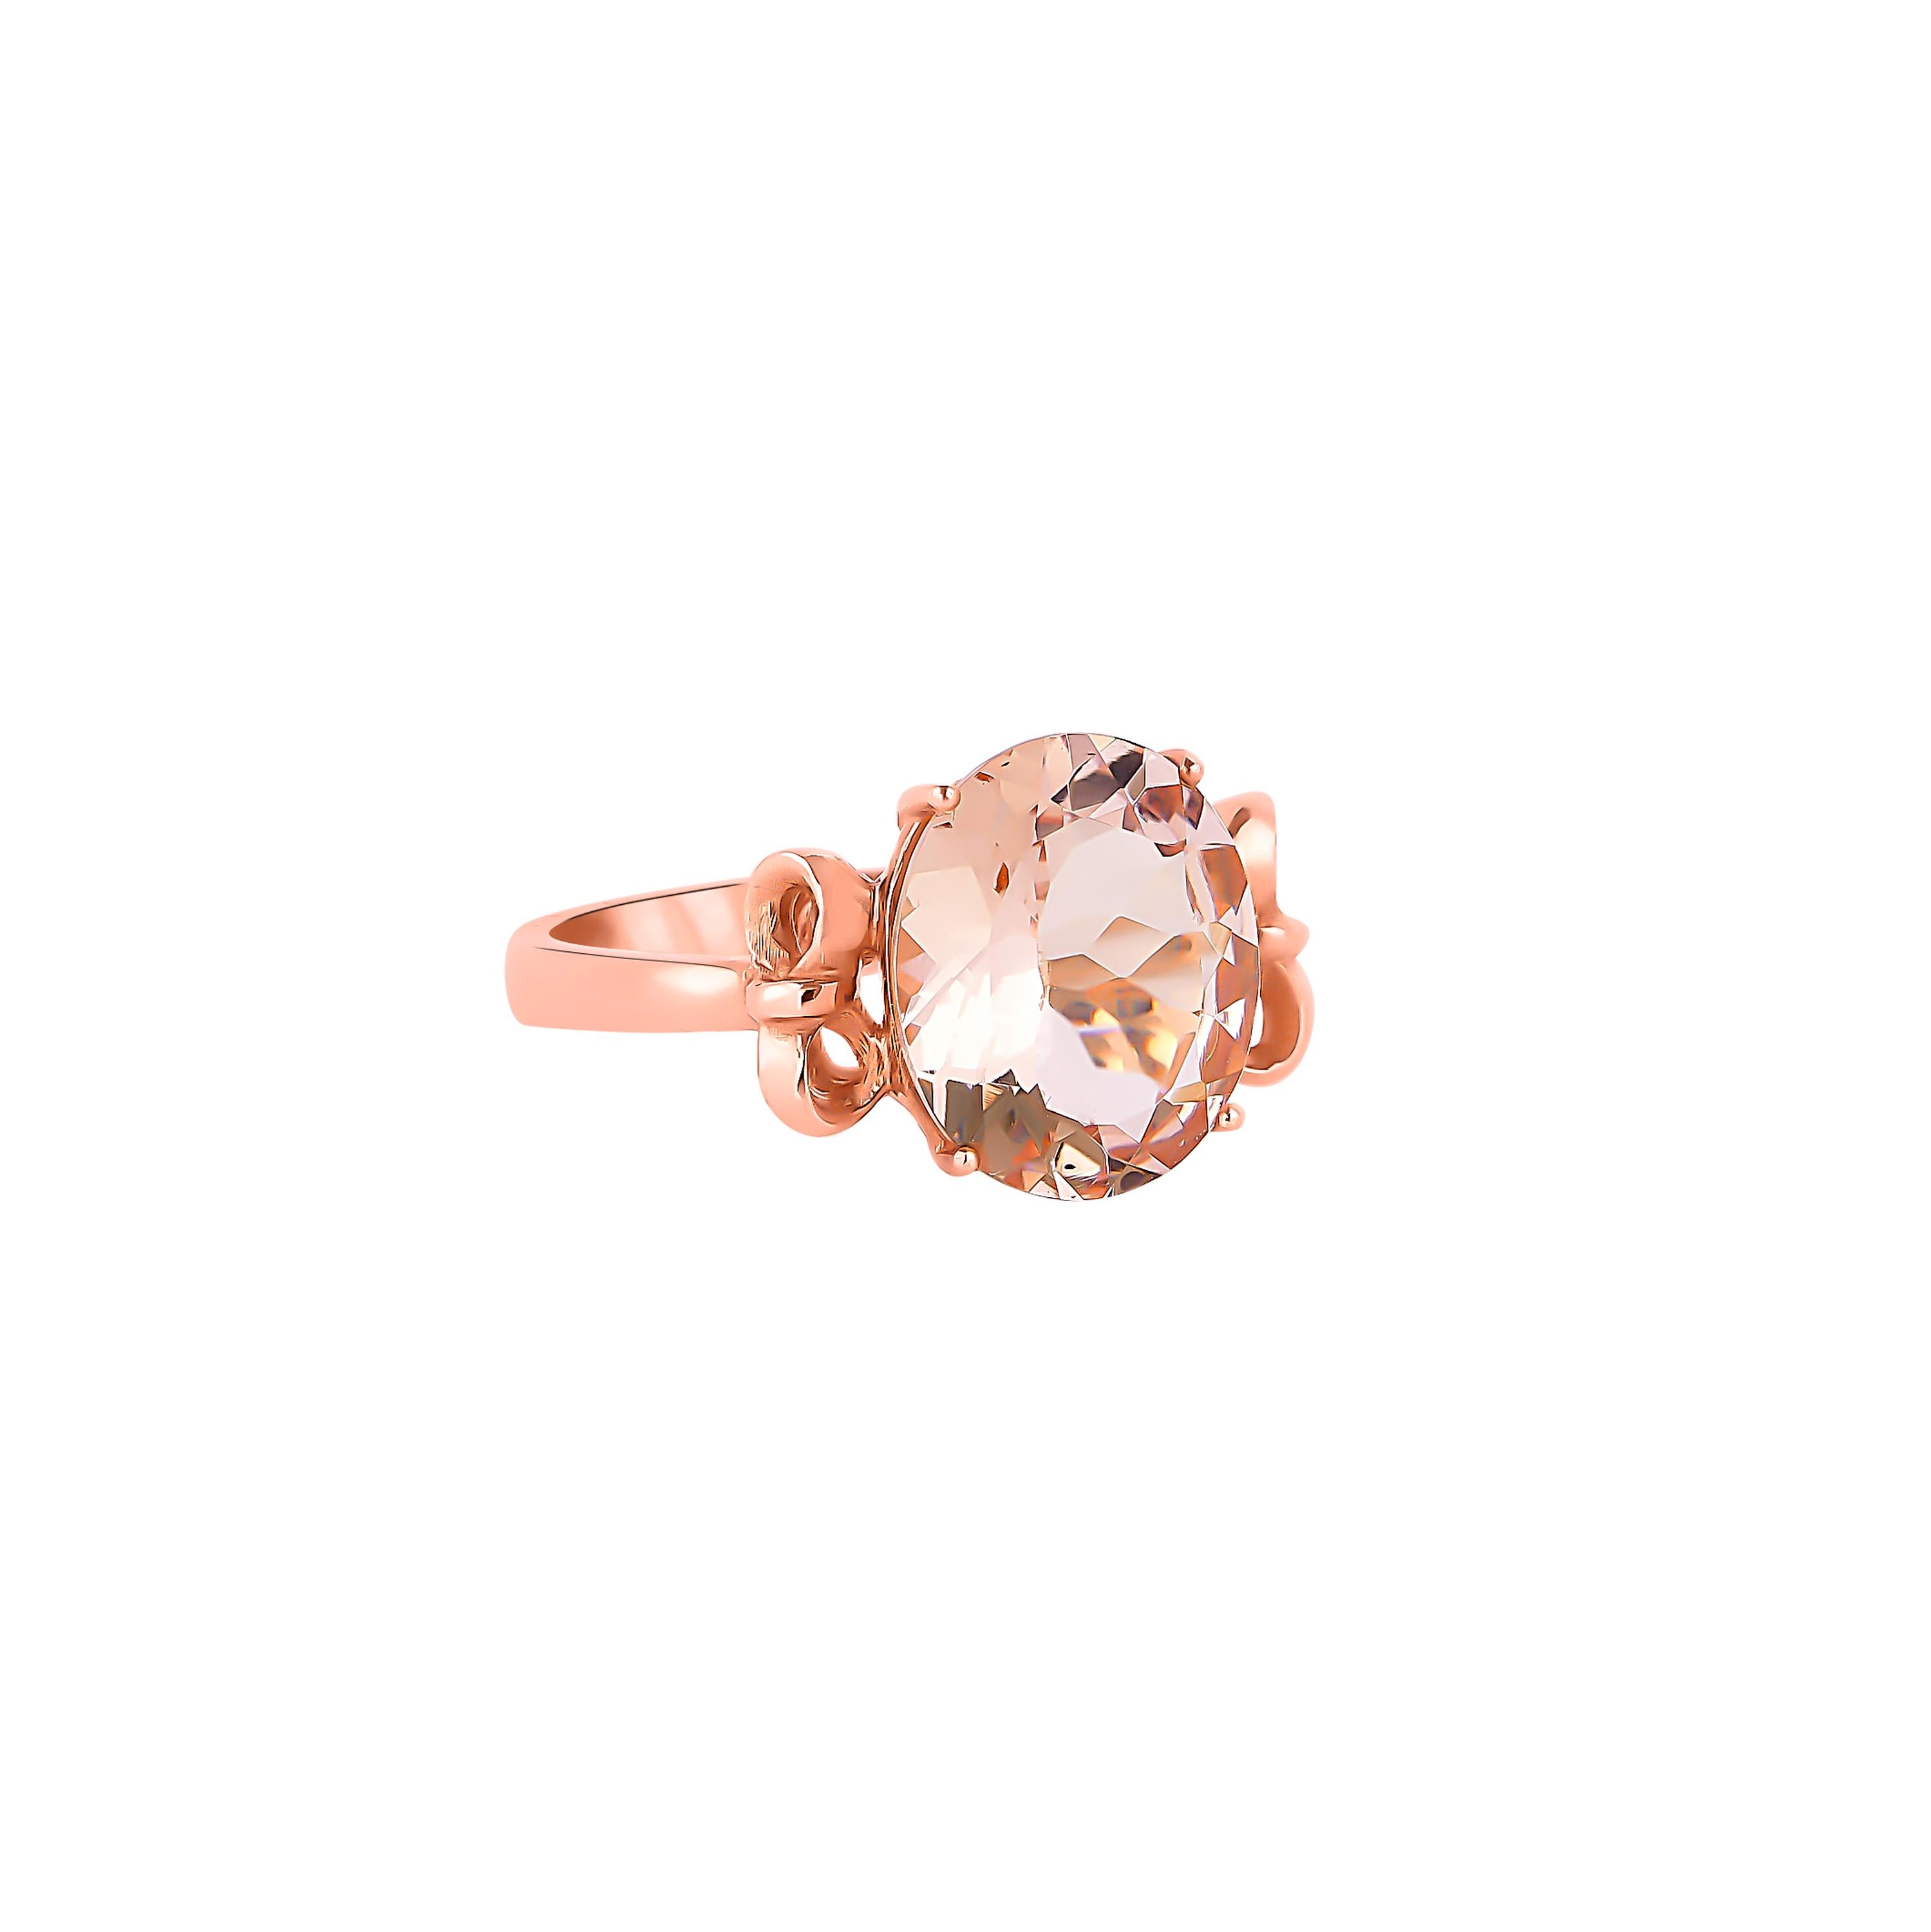 This collection features an array of magnificent morganites! The morganite in the center is in classic oval cut. Accented with Diamond these rings are made in rose gold and present a classic yet elegant look. 

Classic morganite ring in 18K Rose